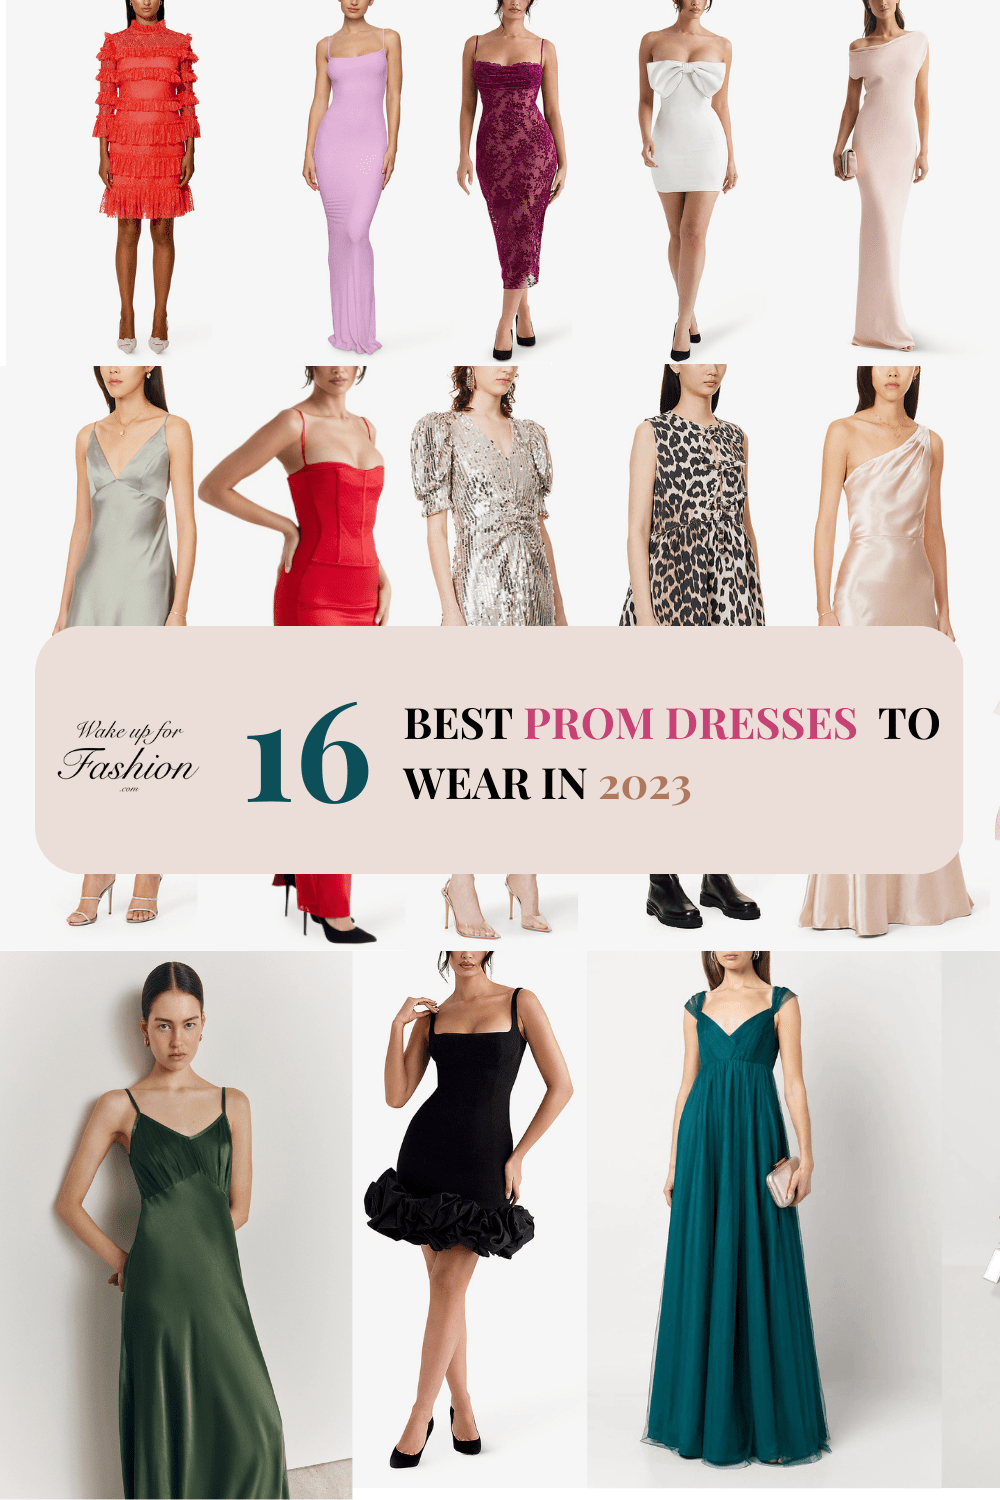 Best prom dresses for 2023 in red, pink, cream, black, green, silver and patterned.